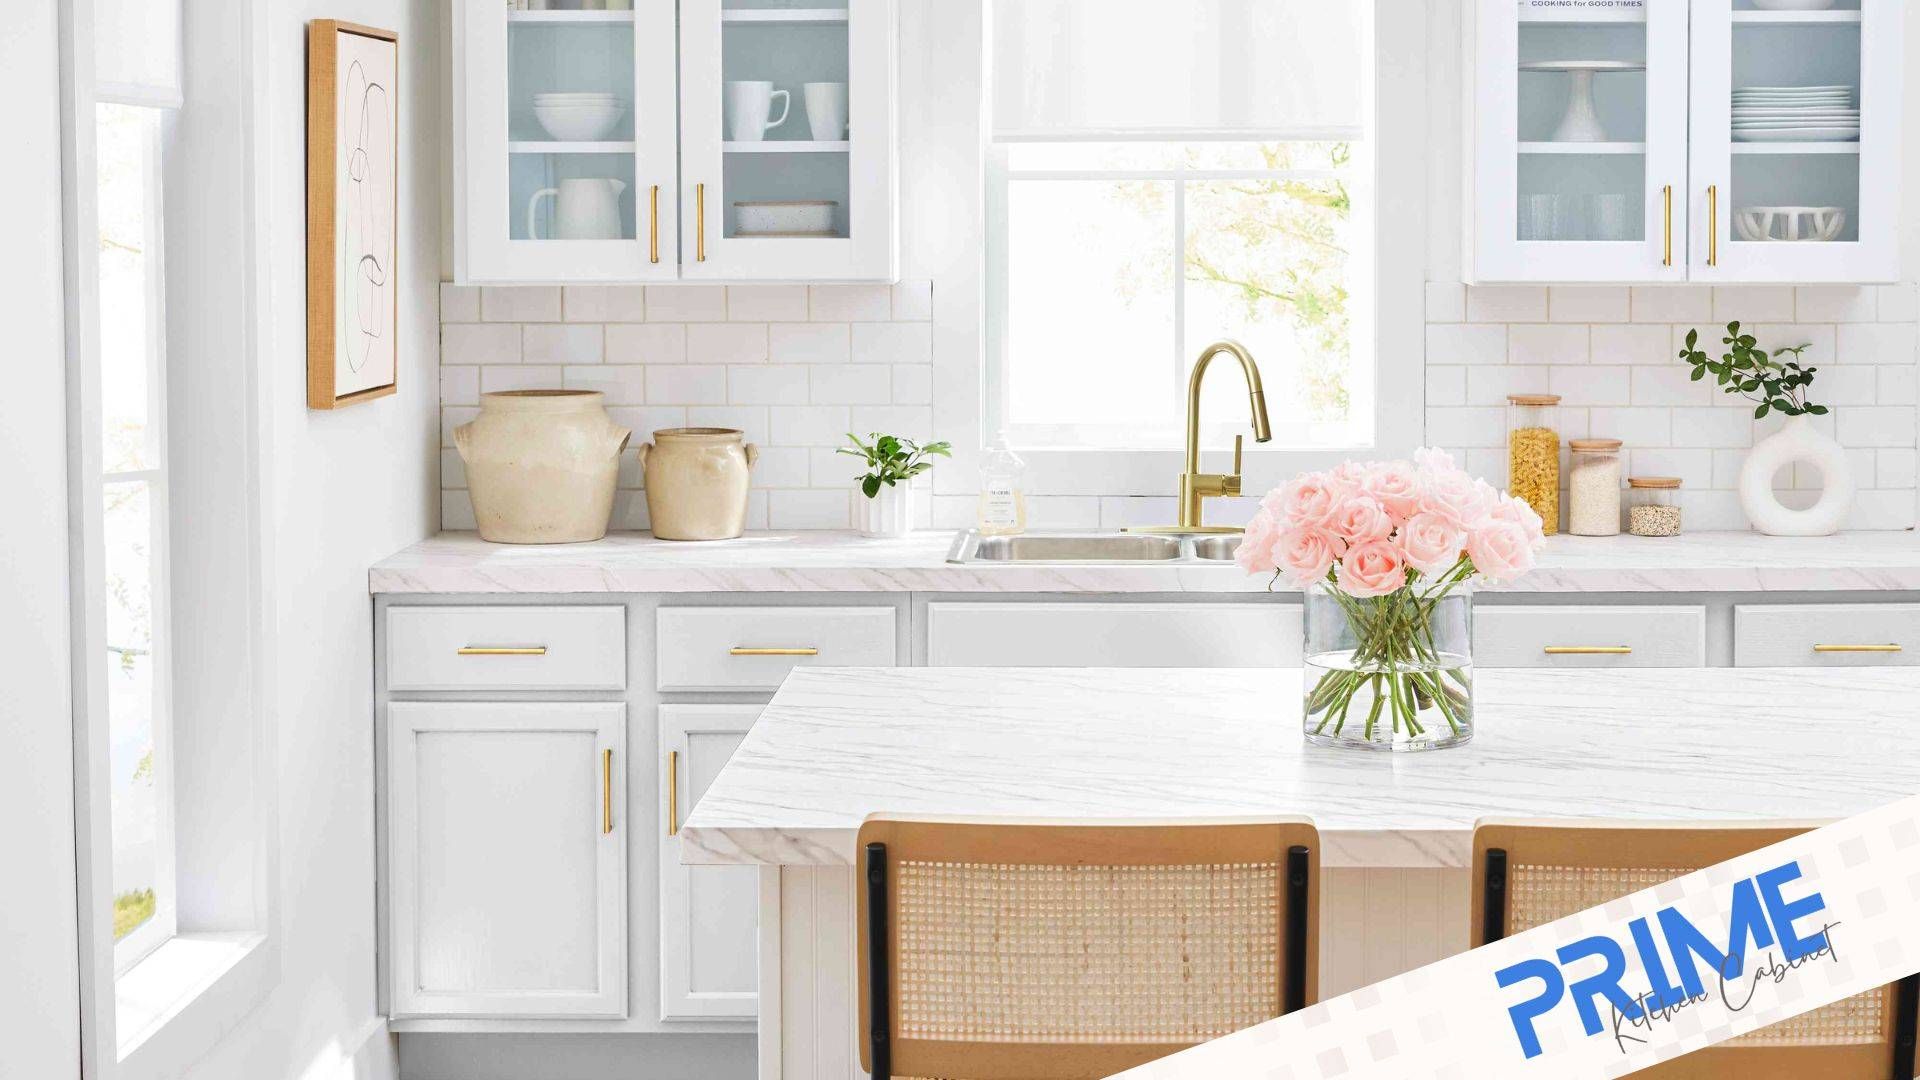 kitchen colors with off white cabinets